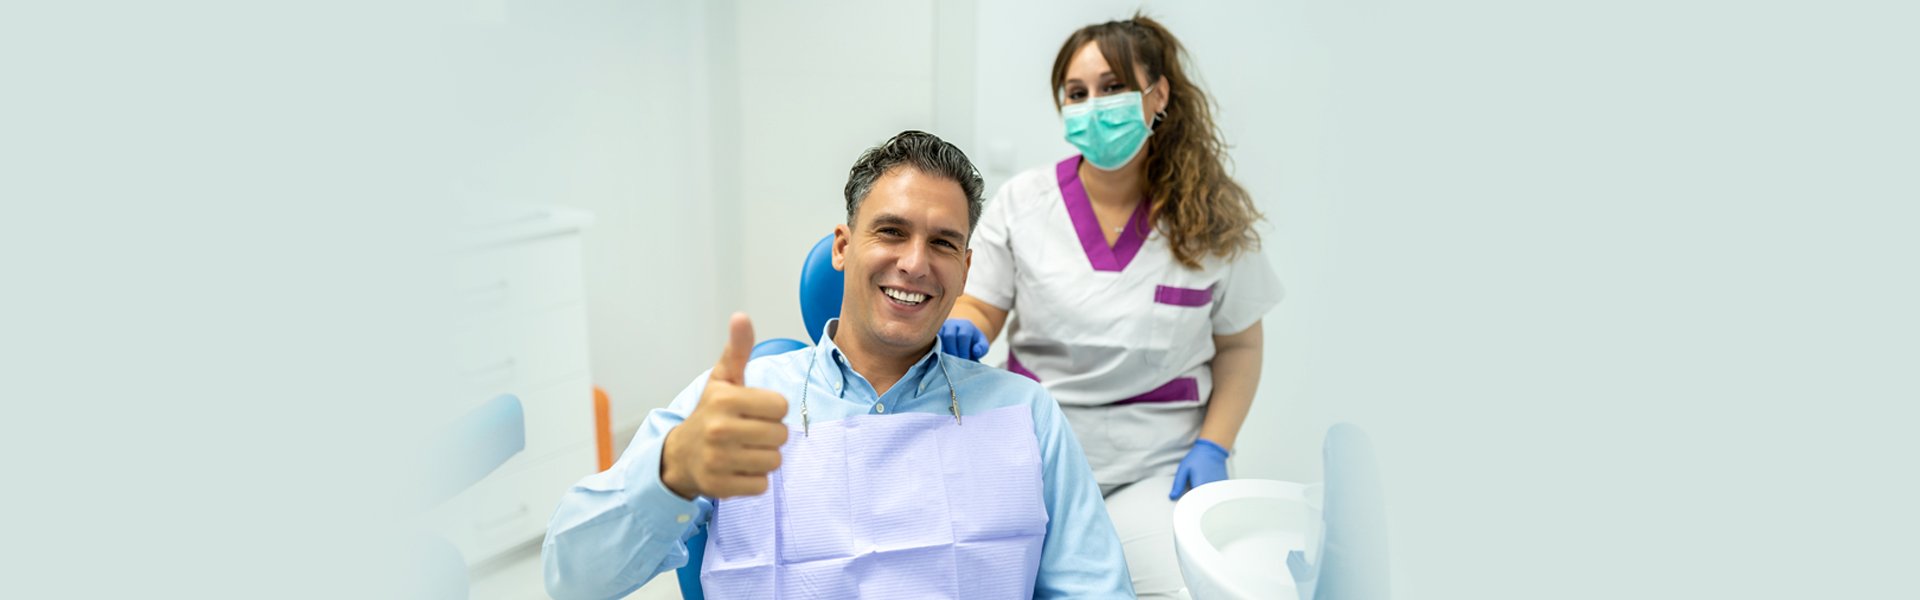 Does a dental exam include cleaning?